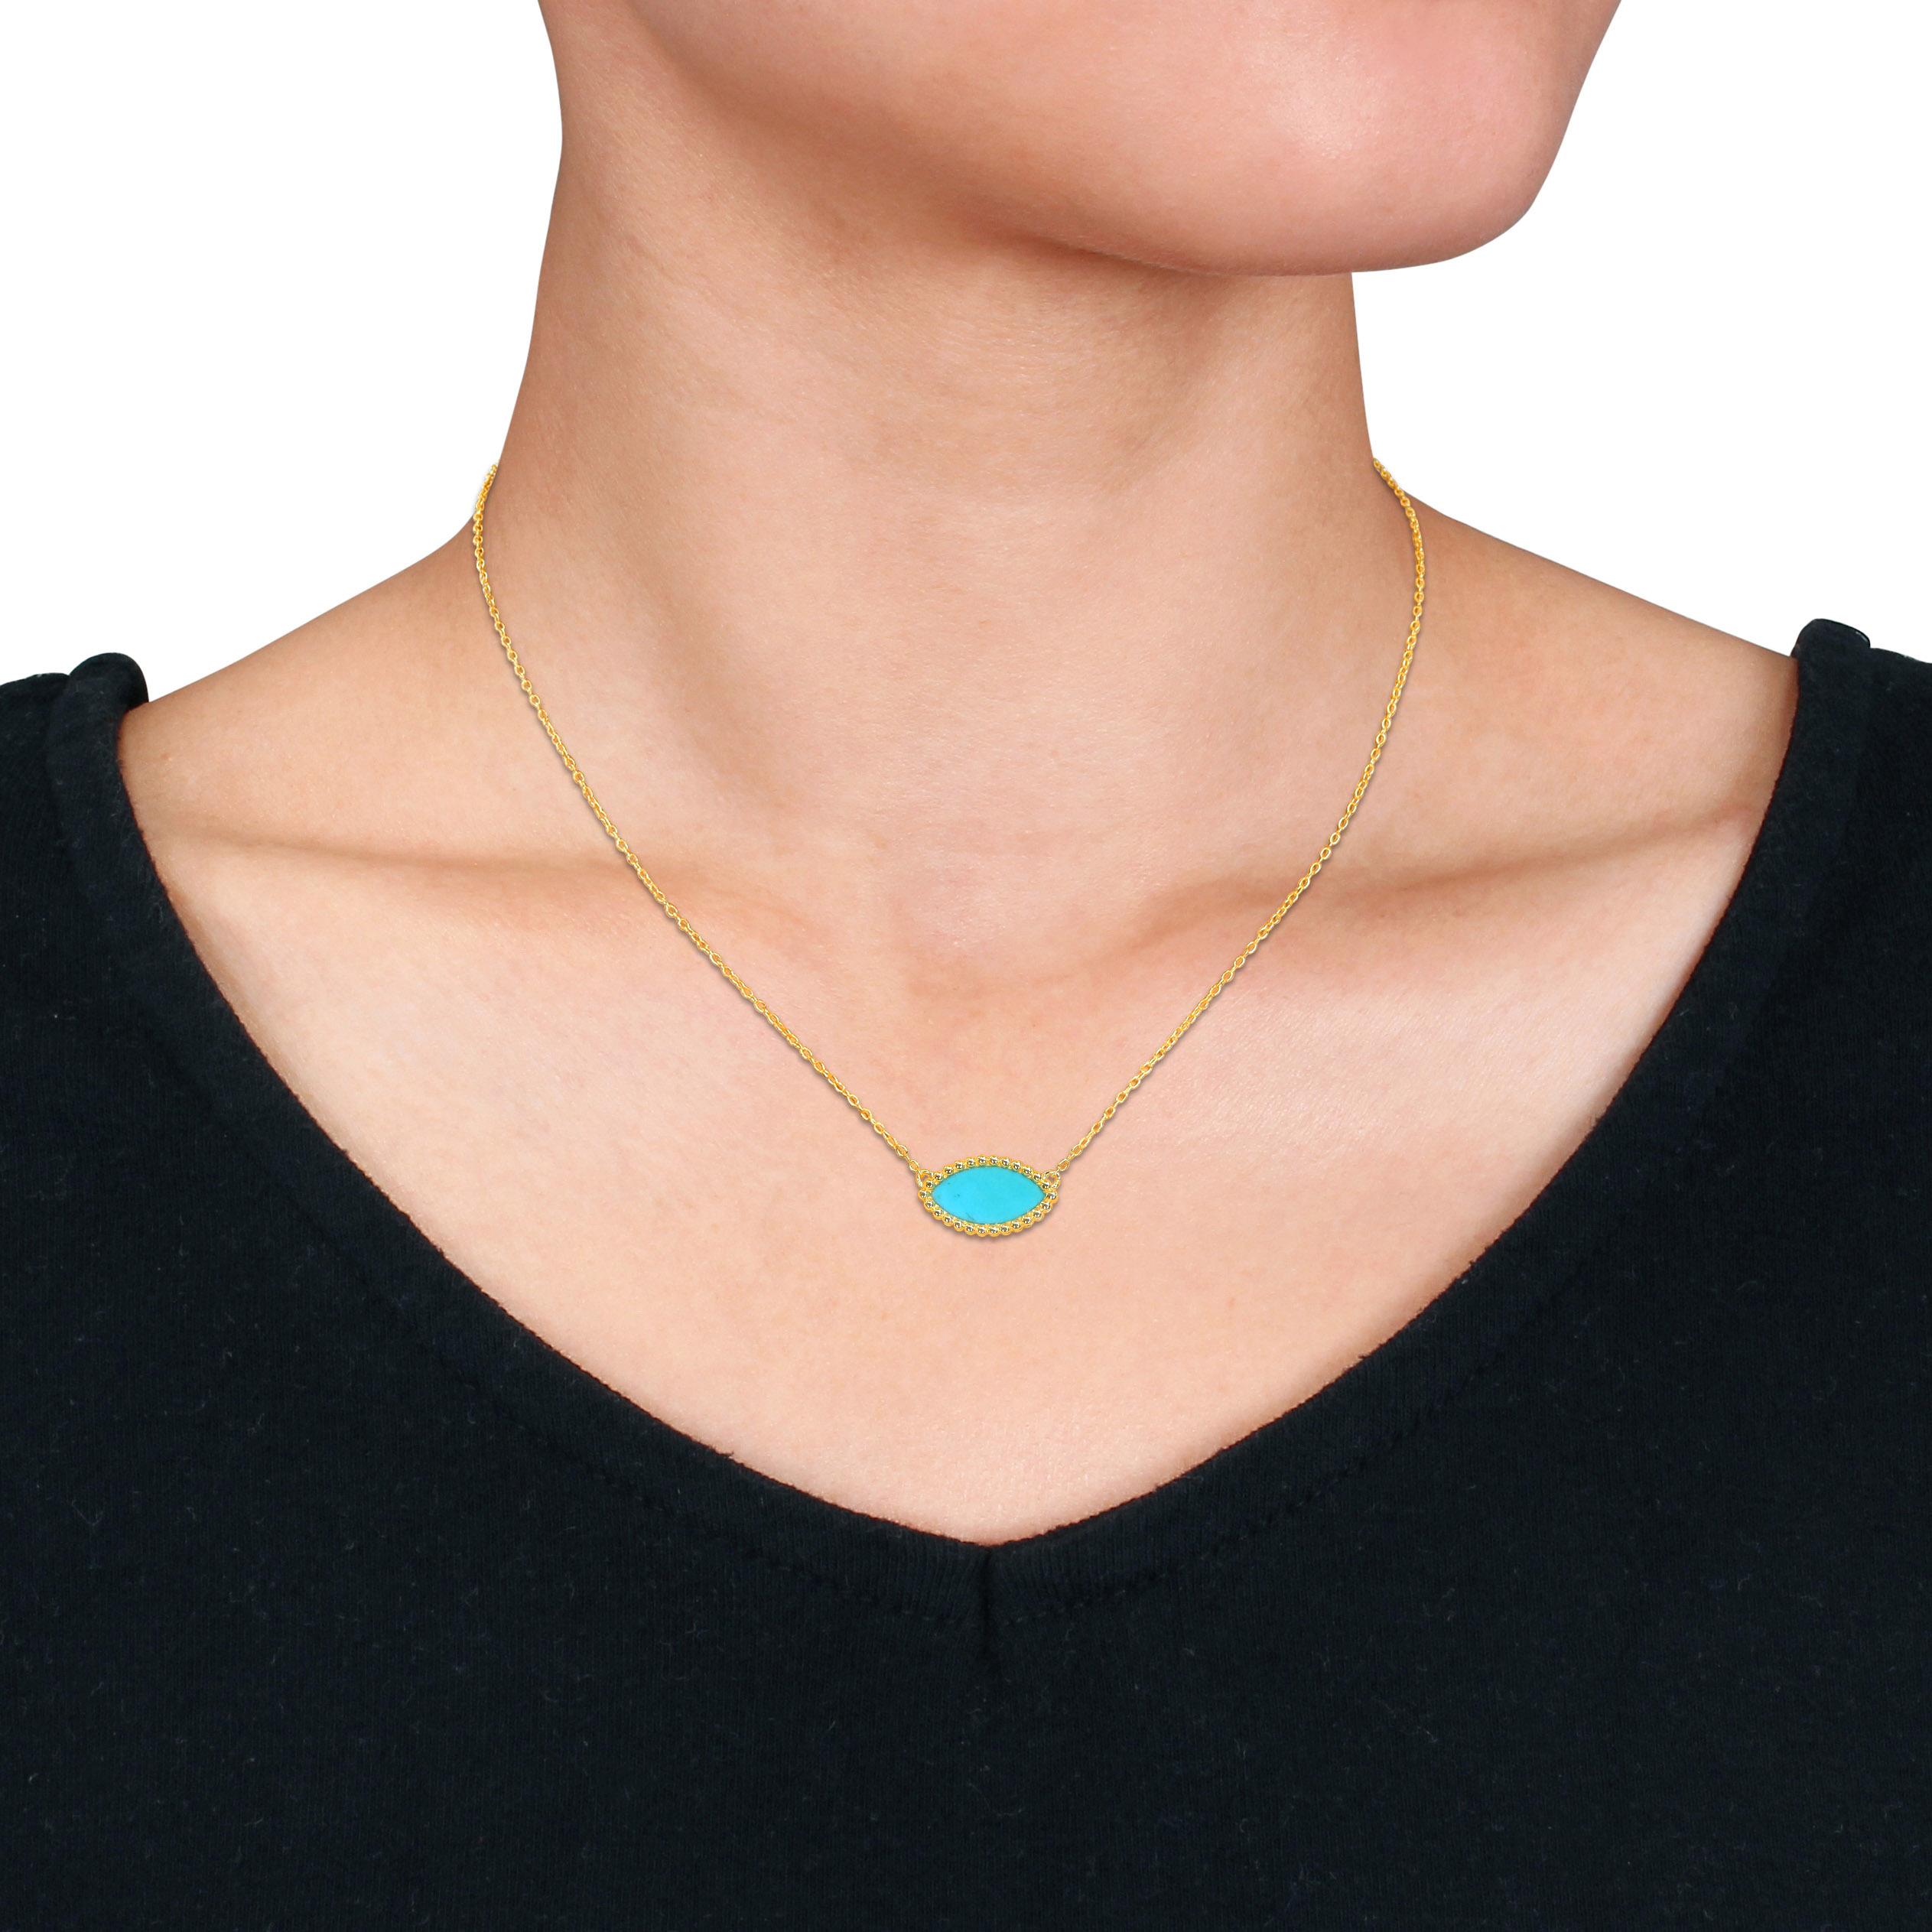 3 CT TGW Marquise Shape Created Turquoise Necklace With Beaded Halo in Yellow Plated Sterling Silver - 17 in.